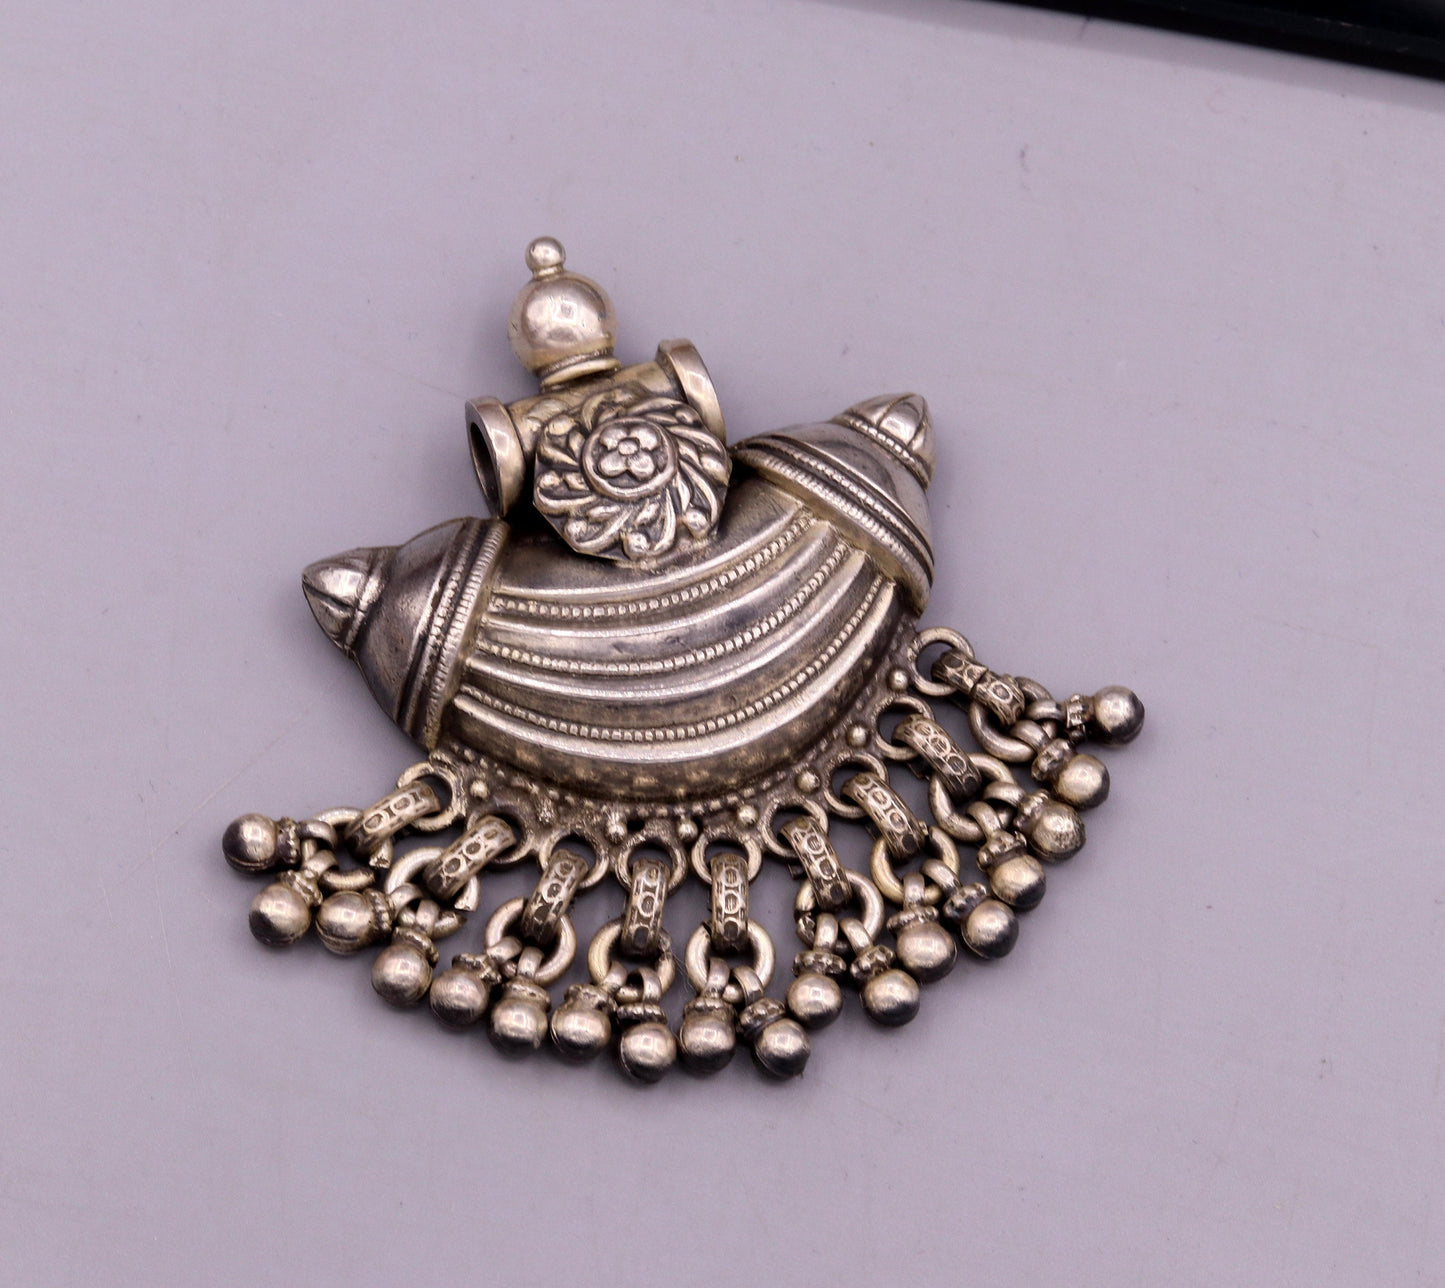 Vintage antique design fabulous hanging bells 925 sterling silver handmade pretty pendant necklace belly dance customized jewelry nsp138 - TRIBAL ORNAMENTS